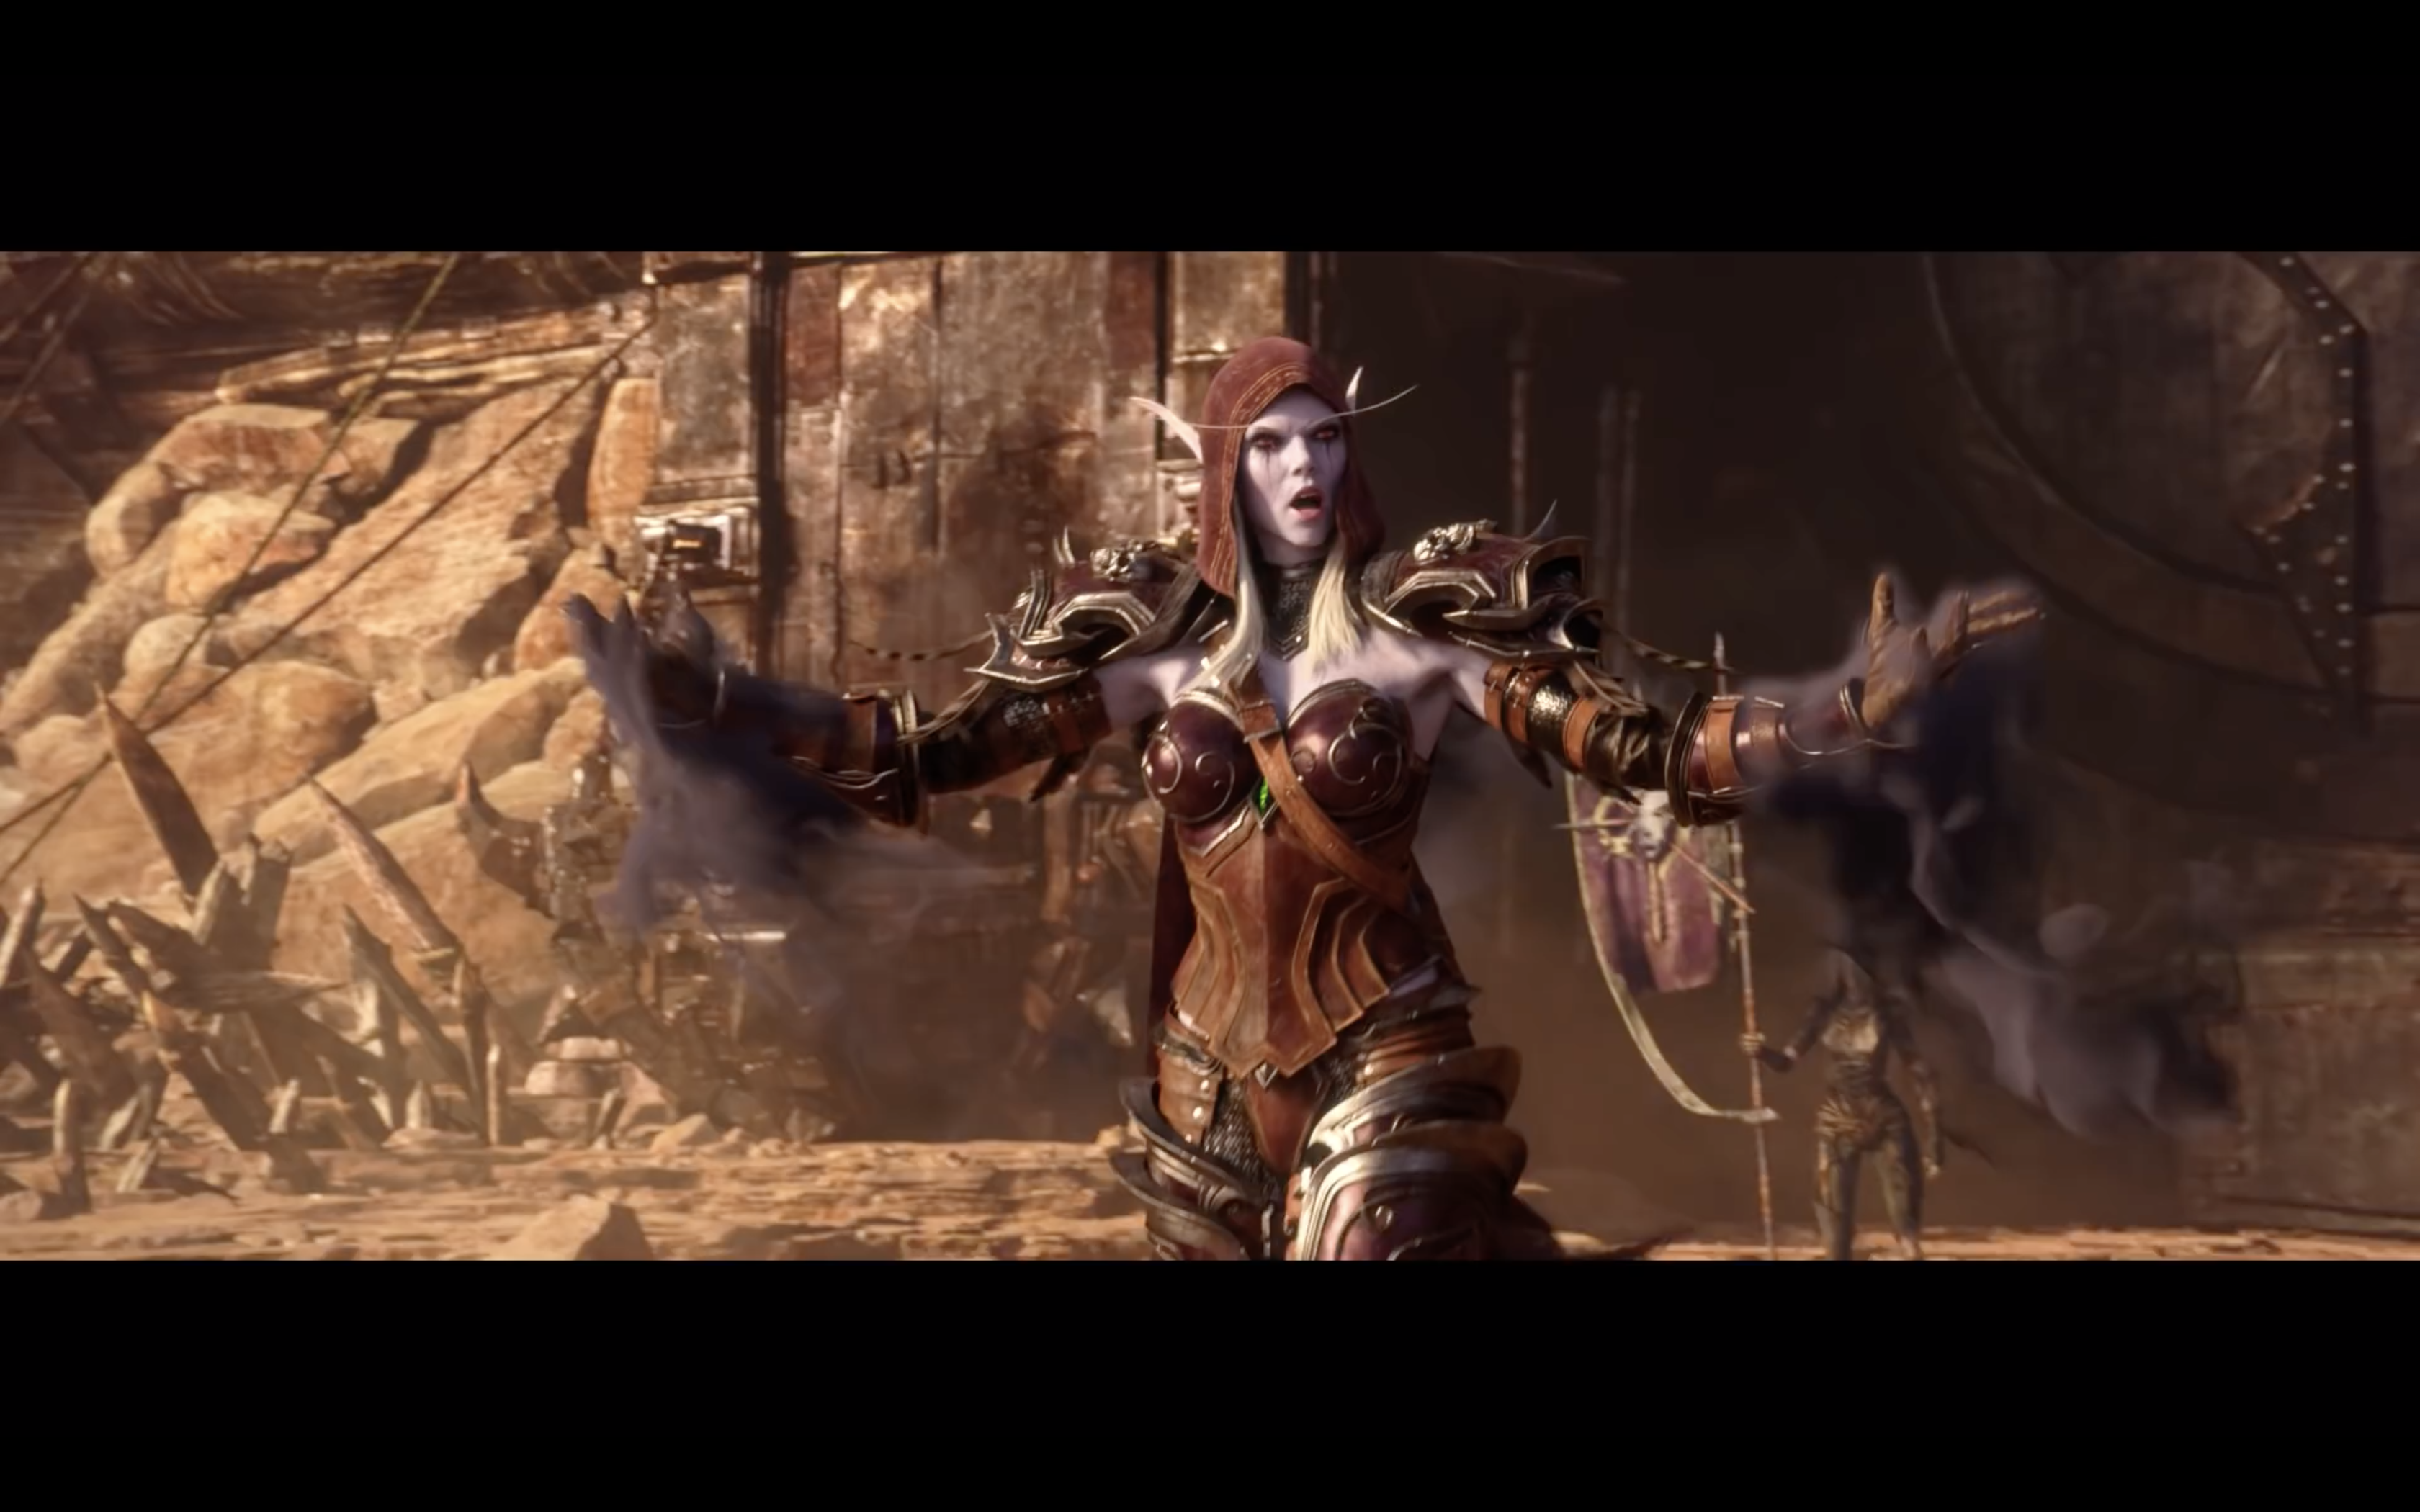 Sylvanas' Plan - The End of Hope and Rise of the Lich ...